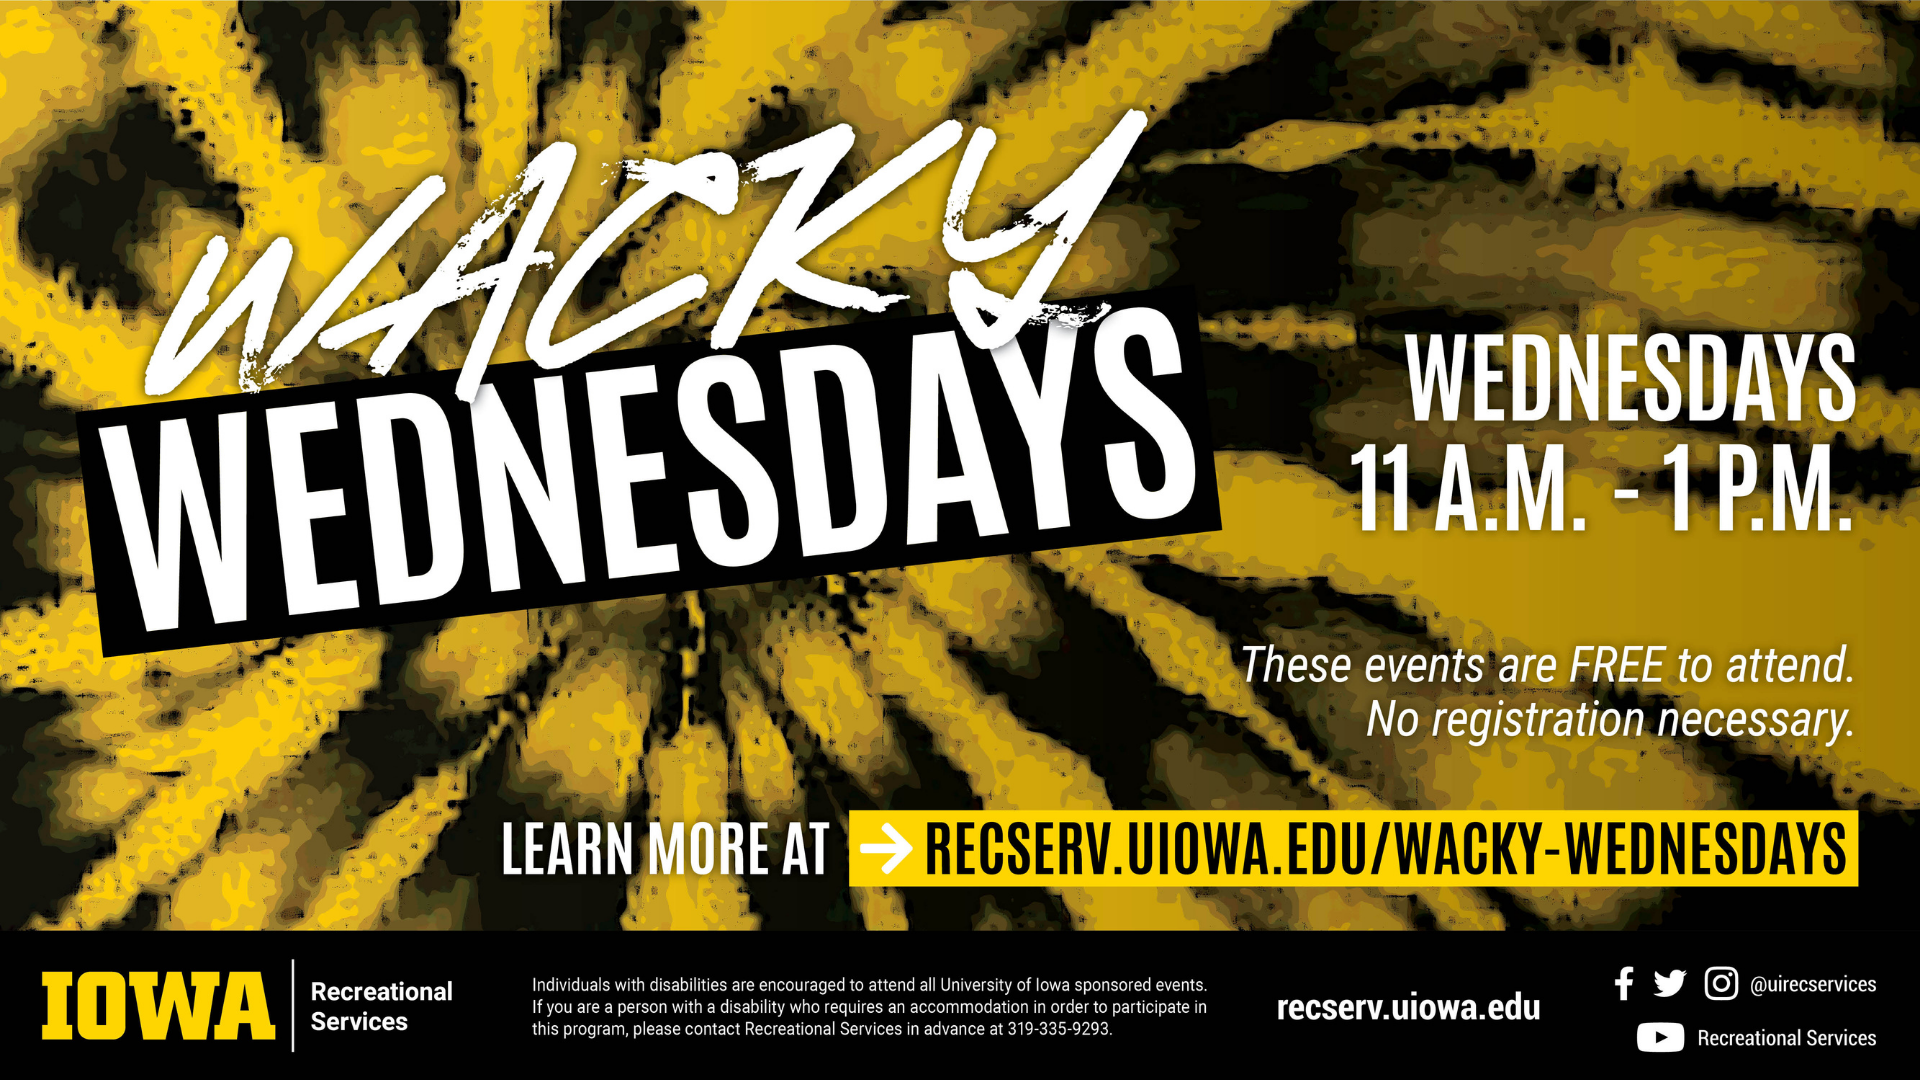 Wacky Wednesdays Wednesdays 11 a.m. - 1p.m. These events are FREE to attend. No registration necessary. Learn more at recserv.uiowa.edu/wacky-wednesdays